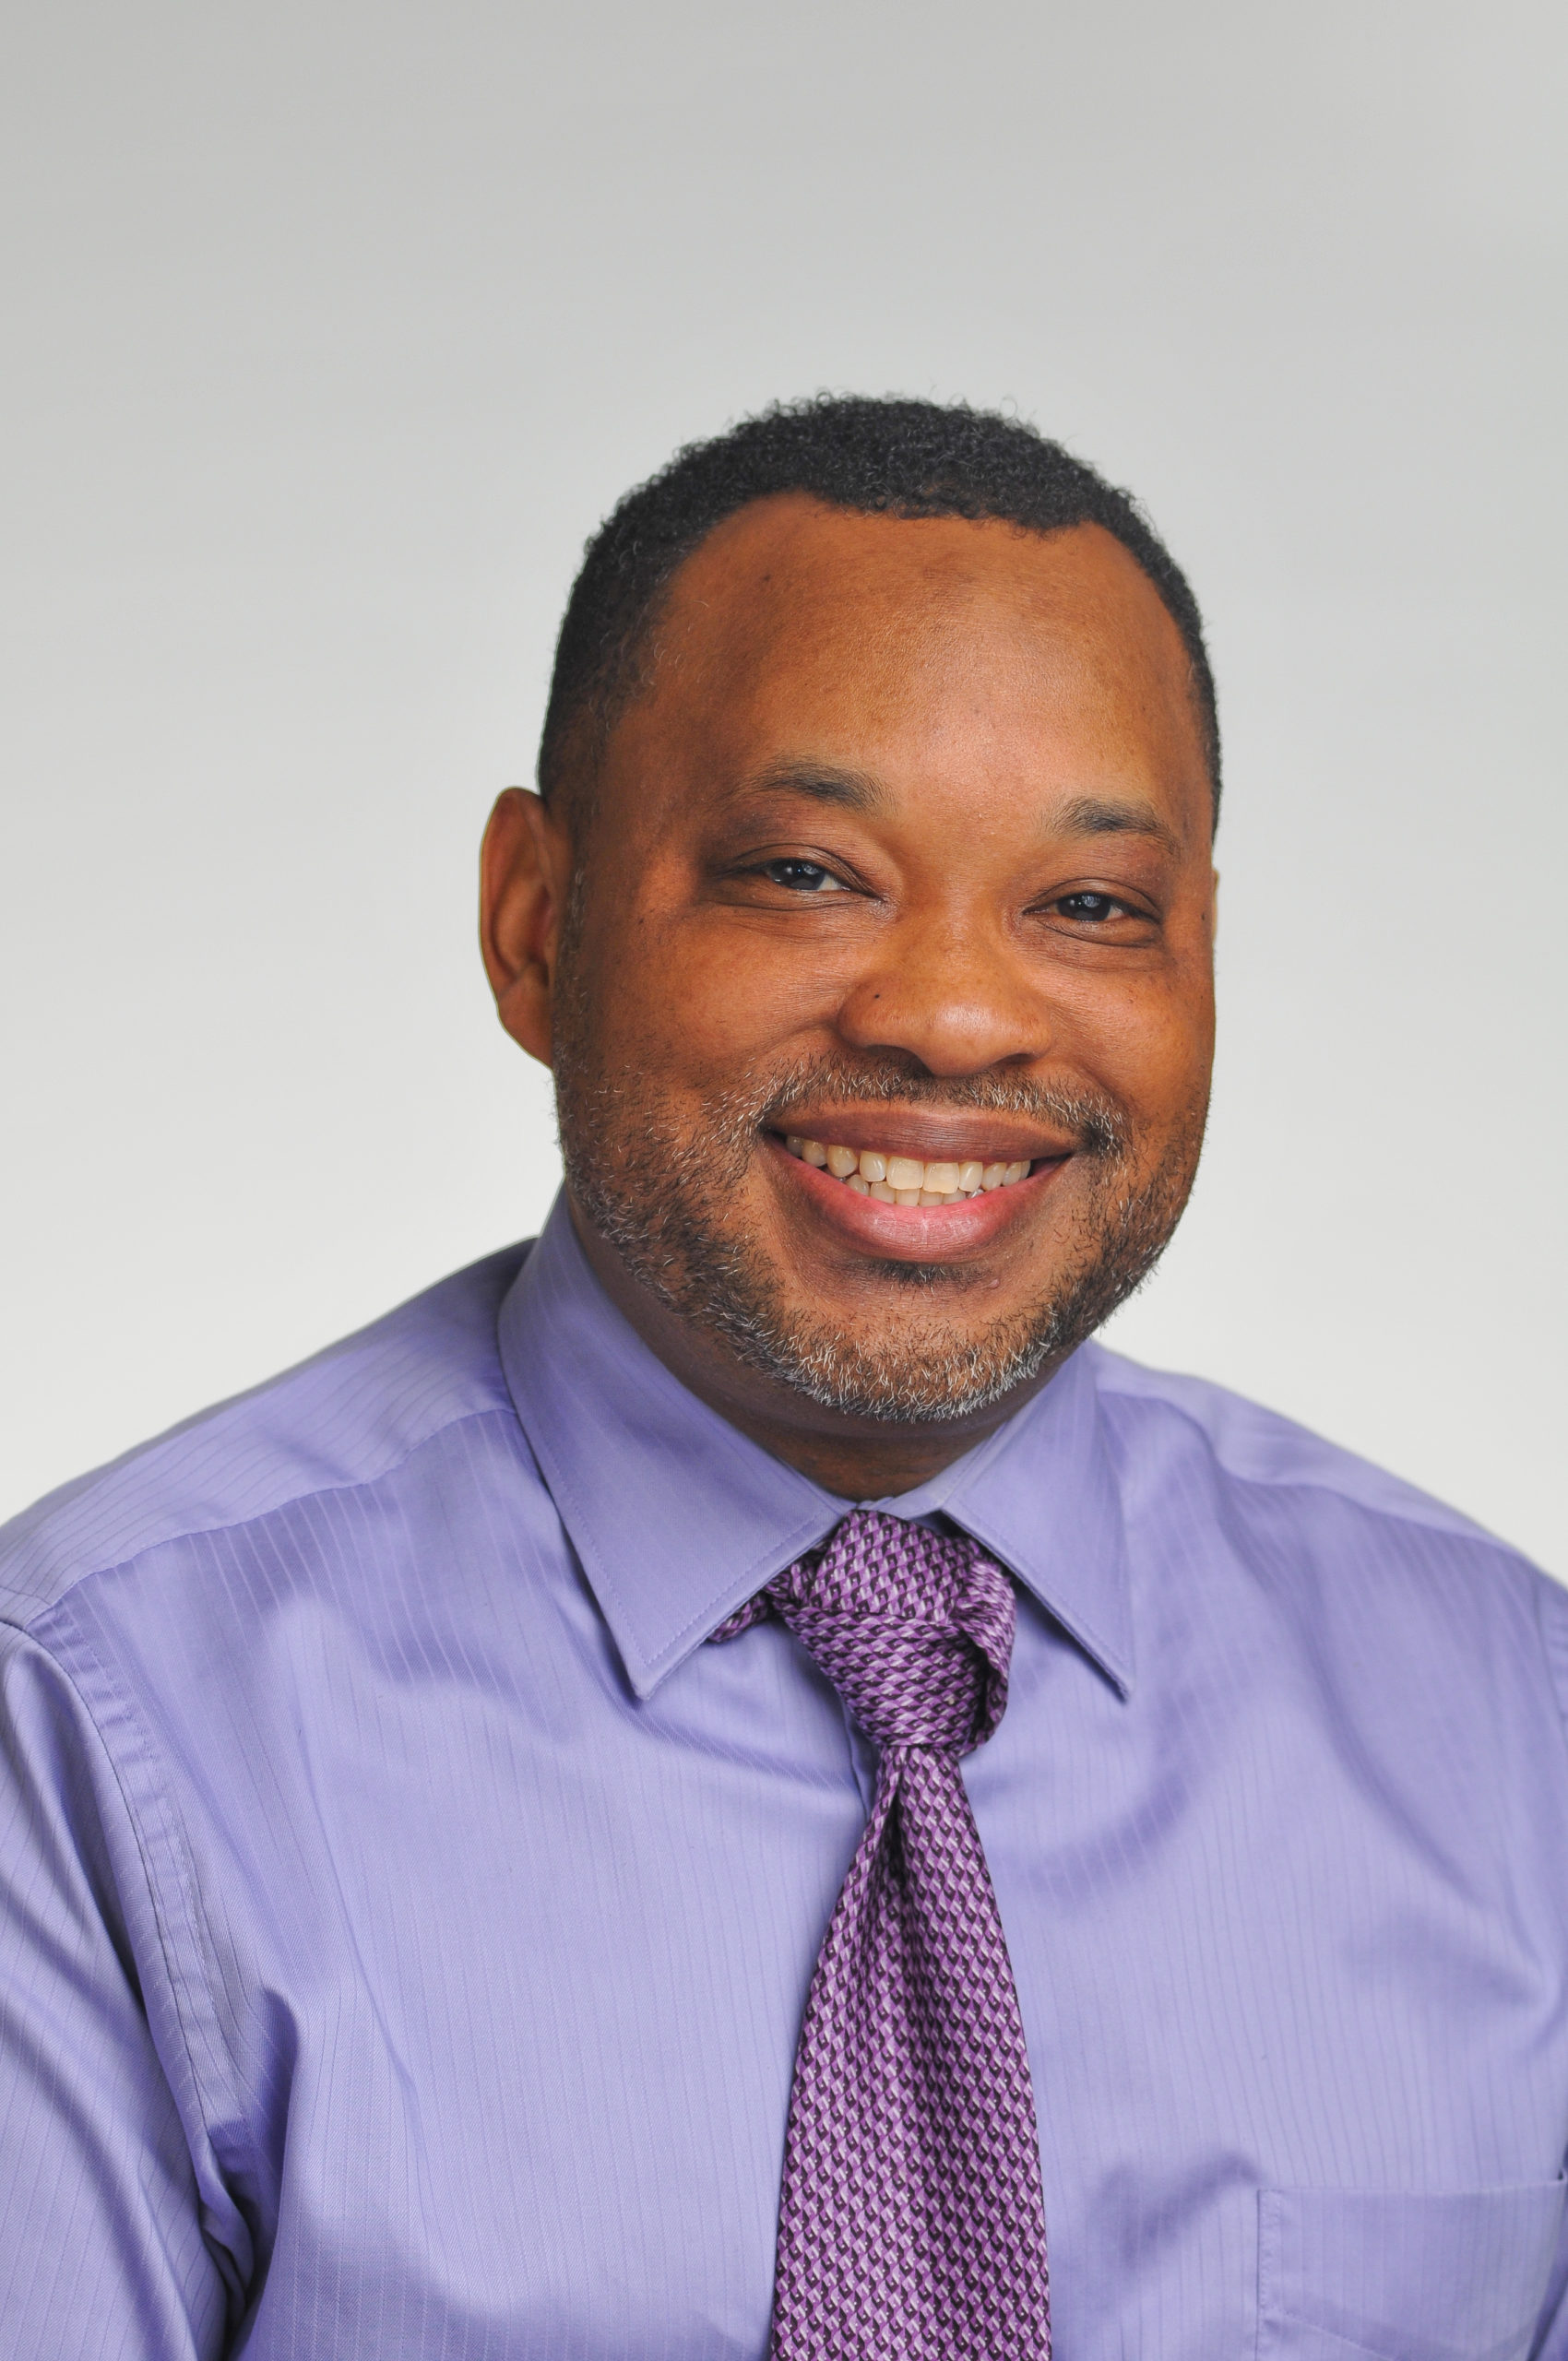 Glen Guyton is the Chief Operations Officer for Mennonite Church USA and Director of Convention Planning